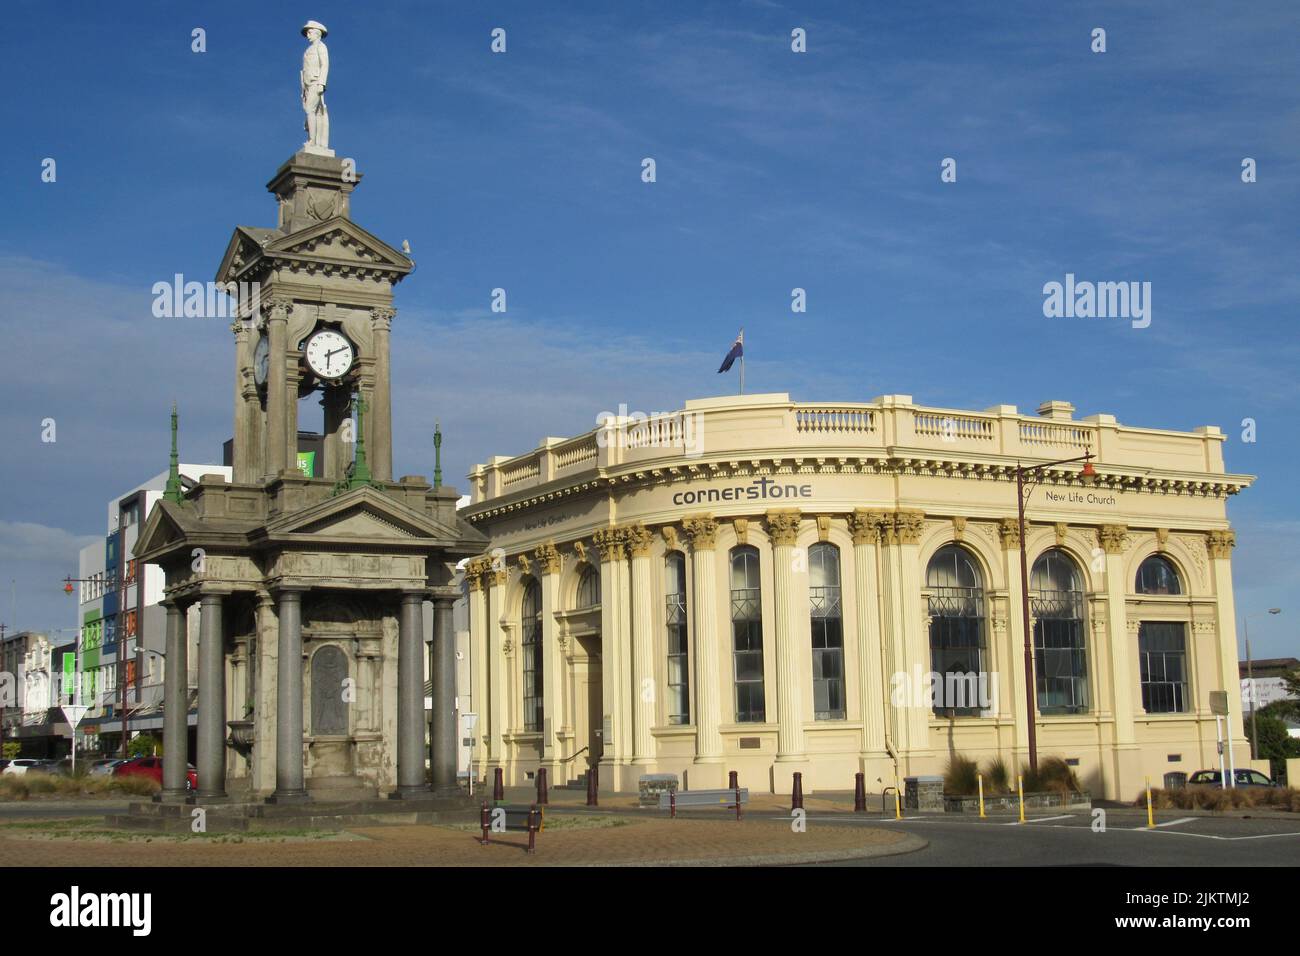 A view of a beautiful building and a clock tower in Invercargill, New Zealand on a sunny day Stock Photo